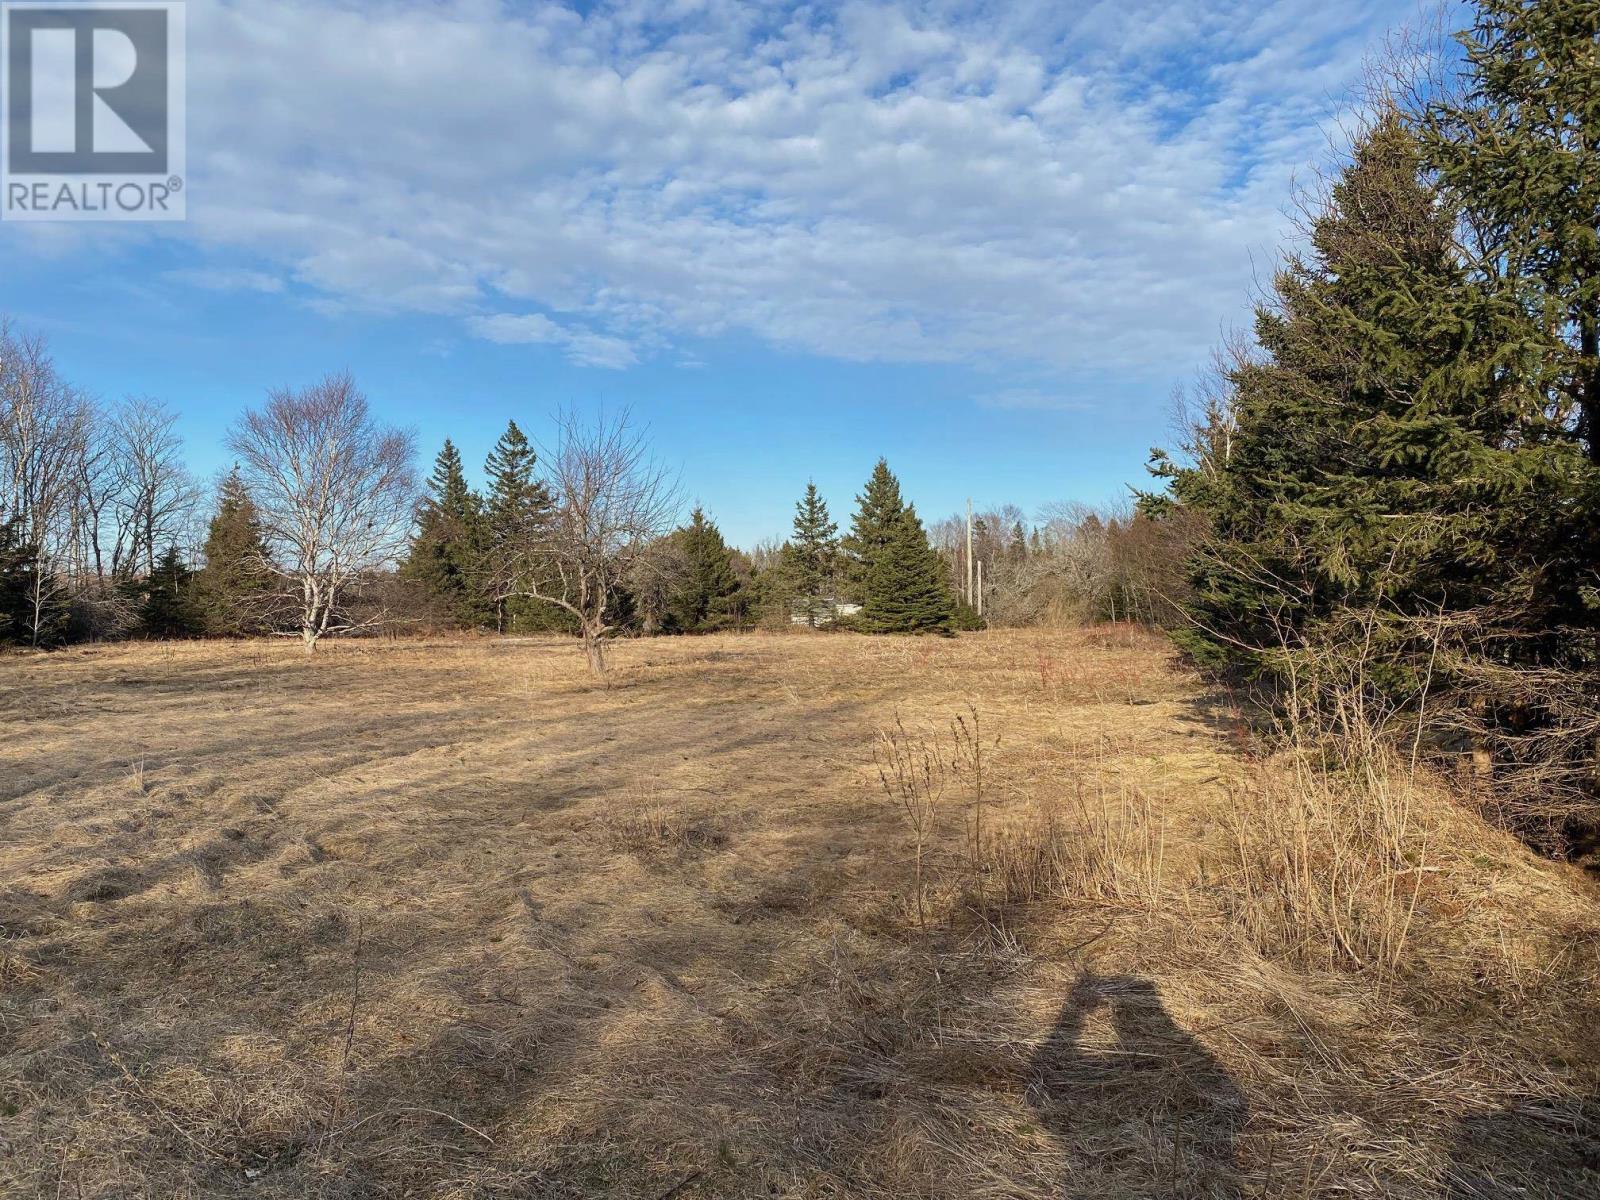 Vacant Land For Sale | Lot 2 Mount Tryon Road | Mount Tryon | C0B1A0